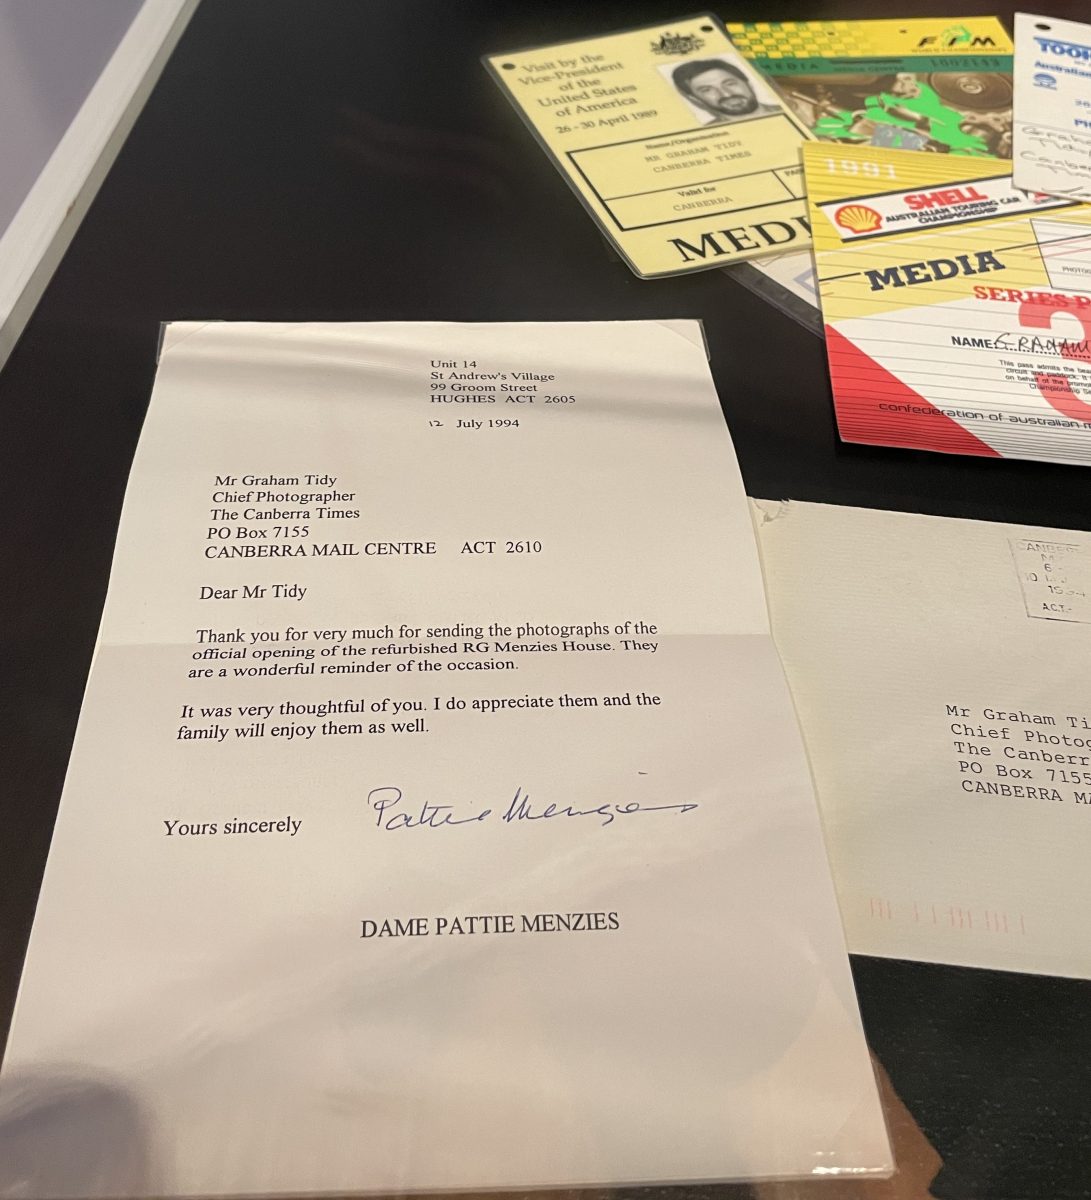 Typed letter by Dame Pattie Manzies